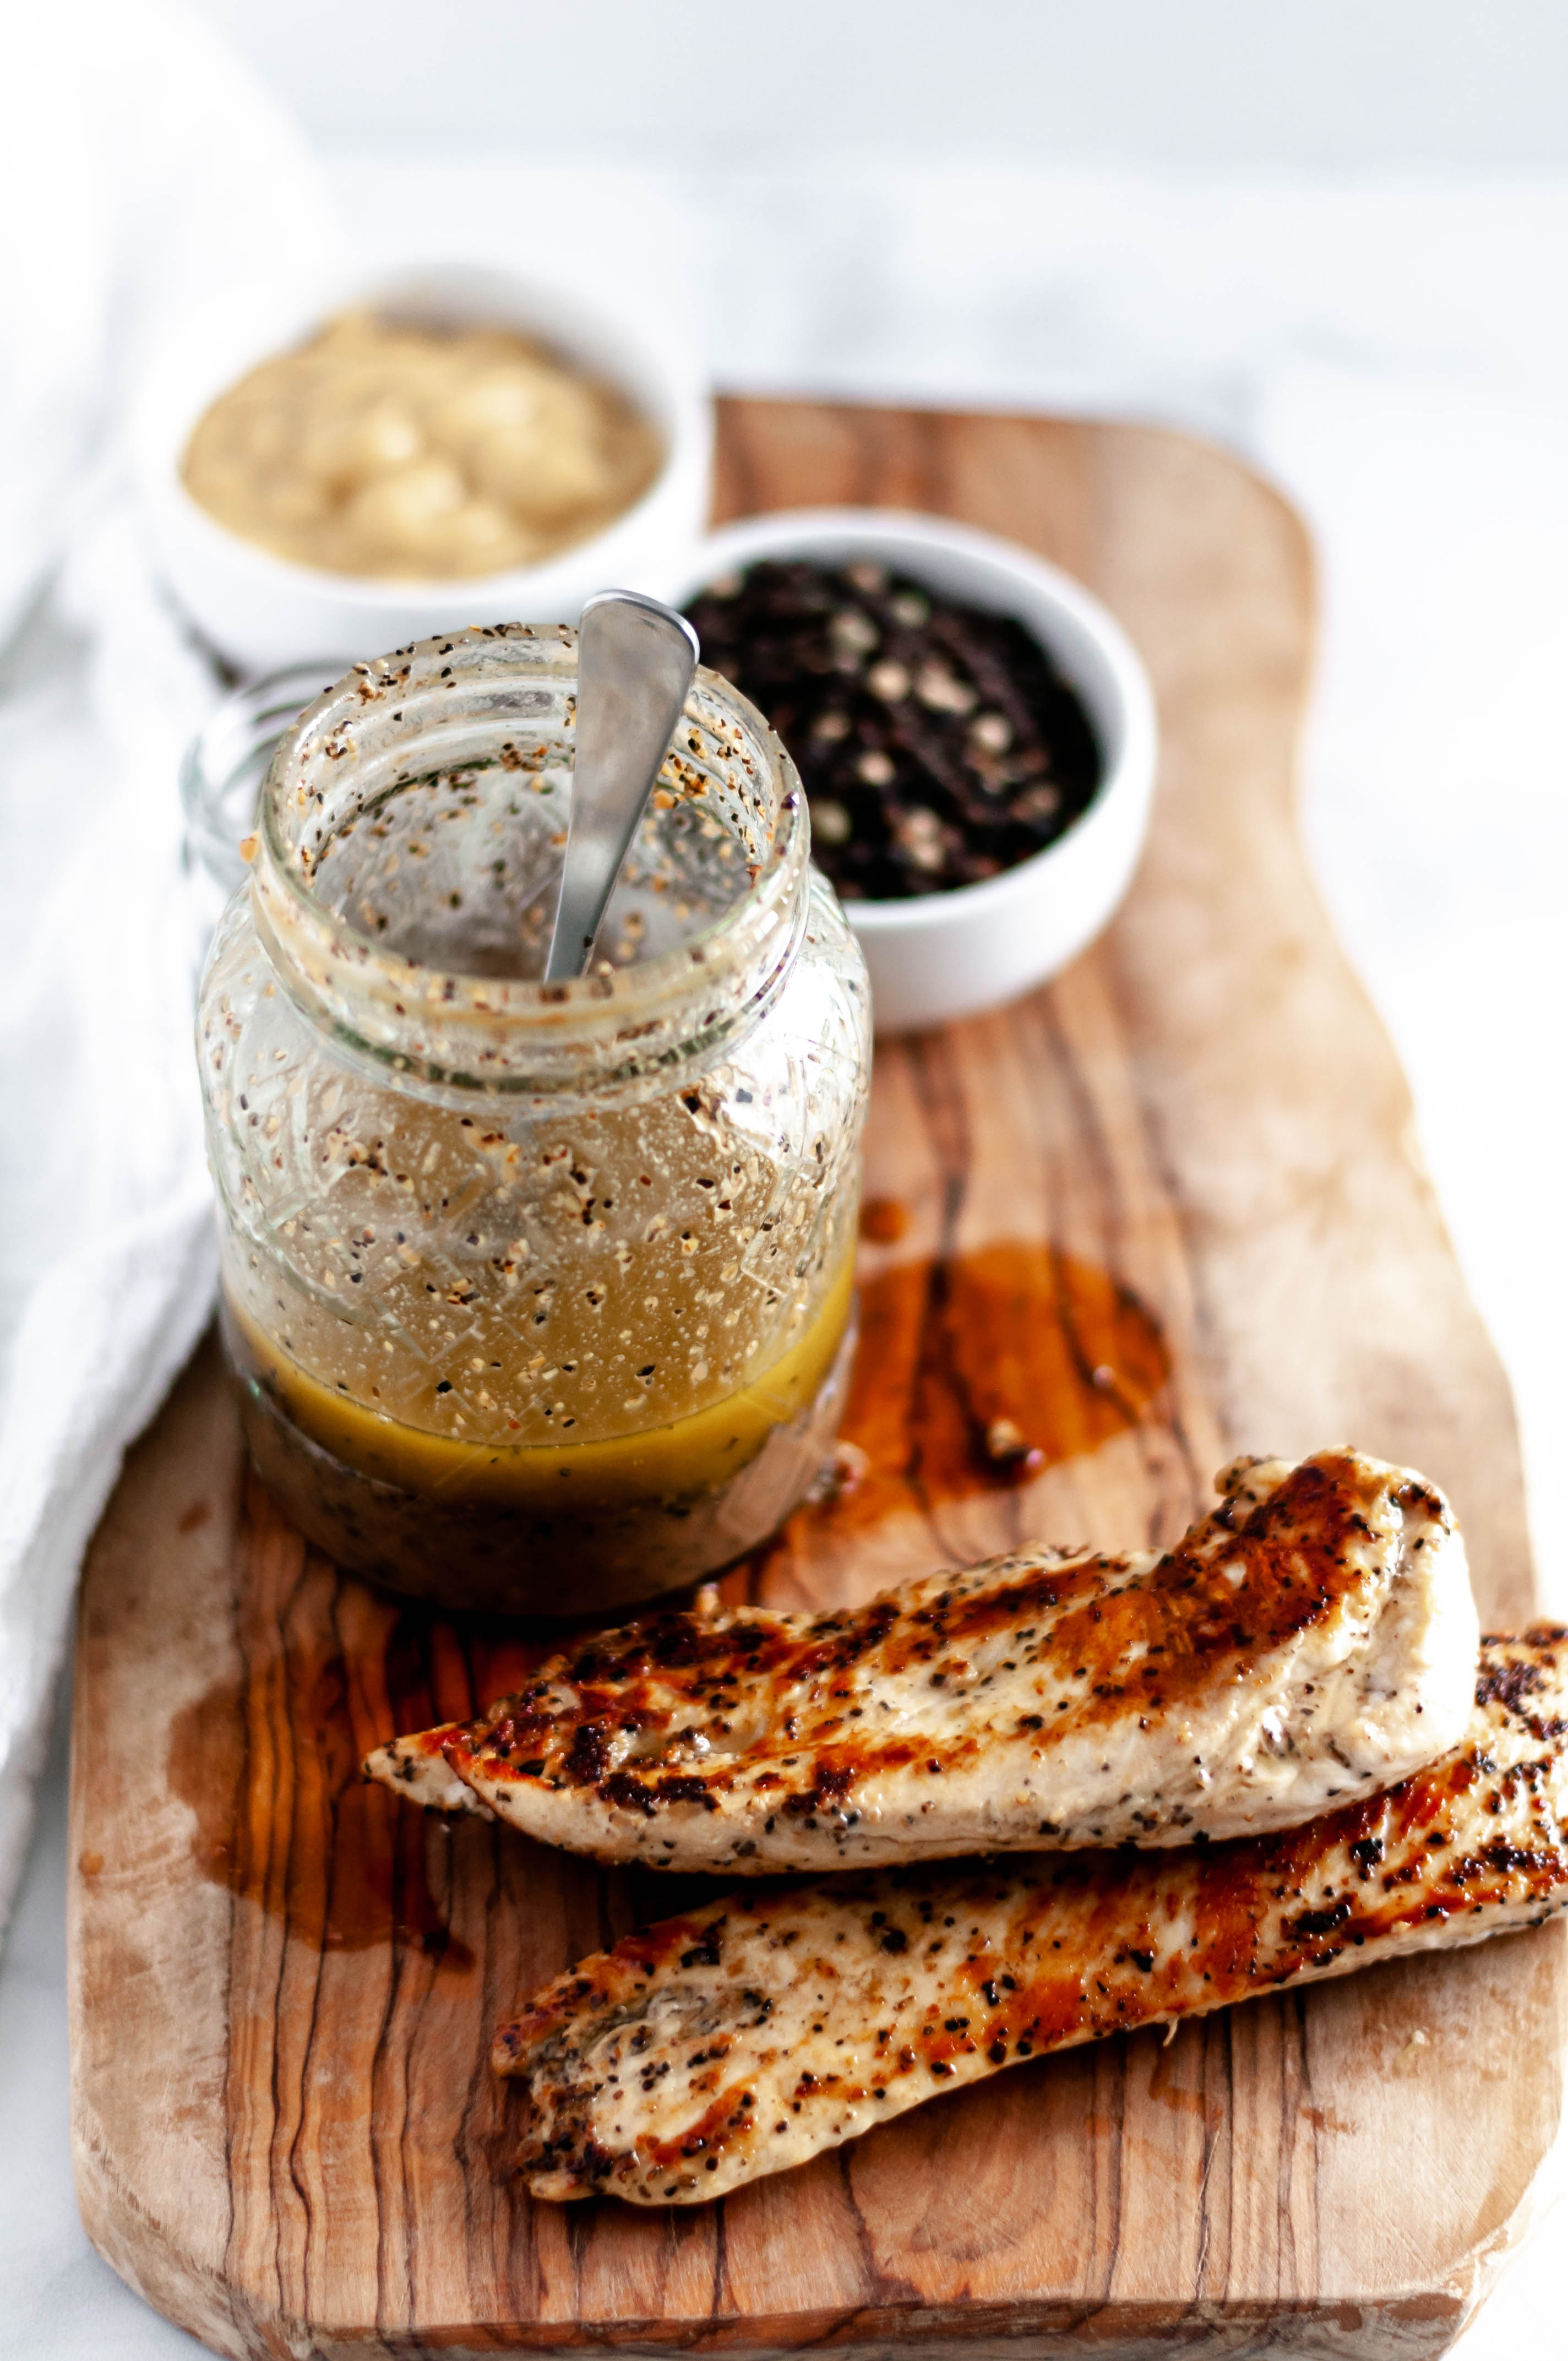 This super simple black peppercorn marinade will bring all the flavor to your chicken, beef, pork and veggies. Keep it on hand all summer long.